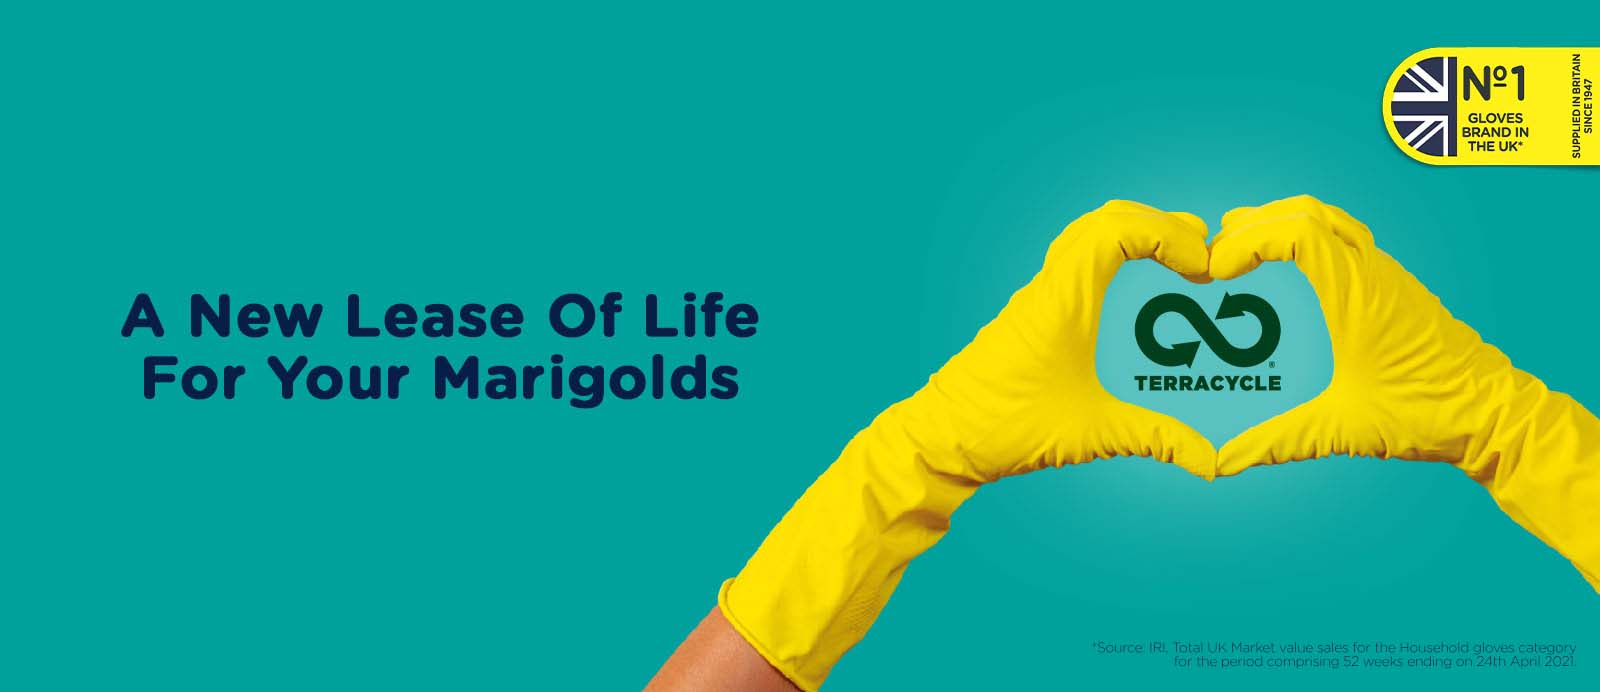 Marigold and TerraCycle in Partnership